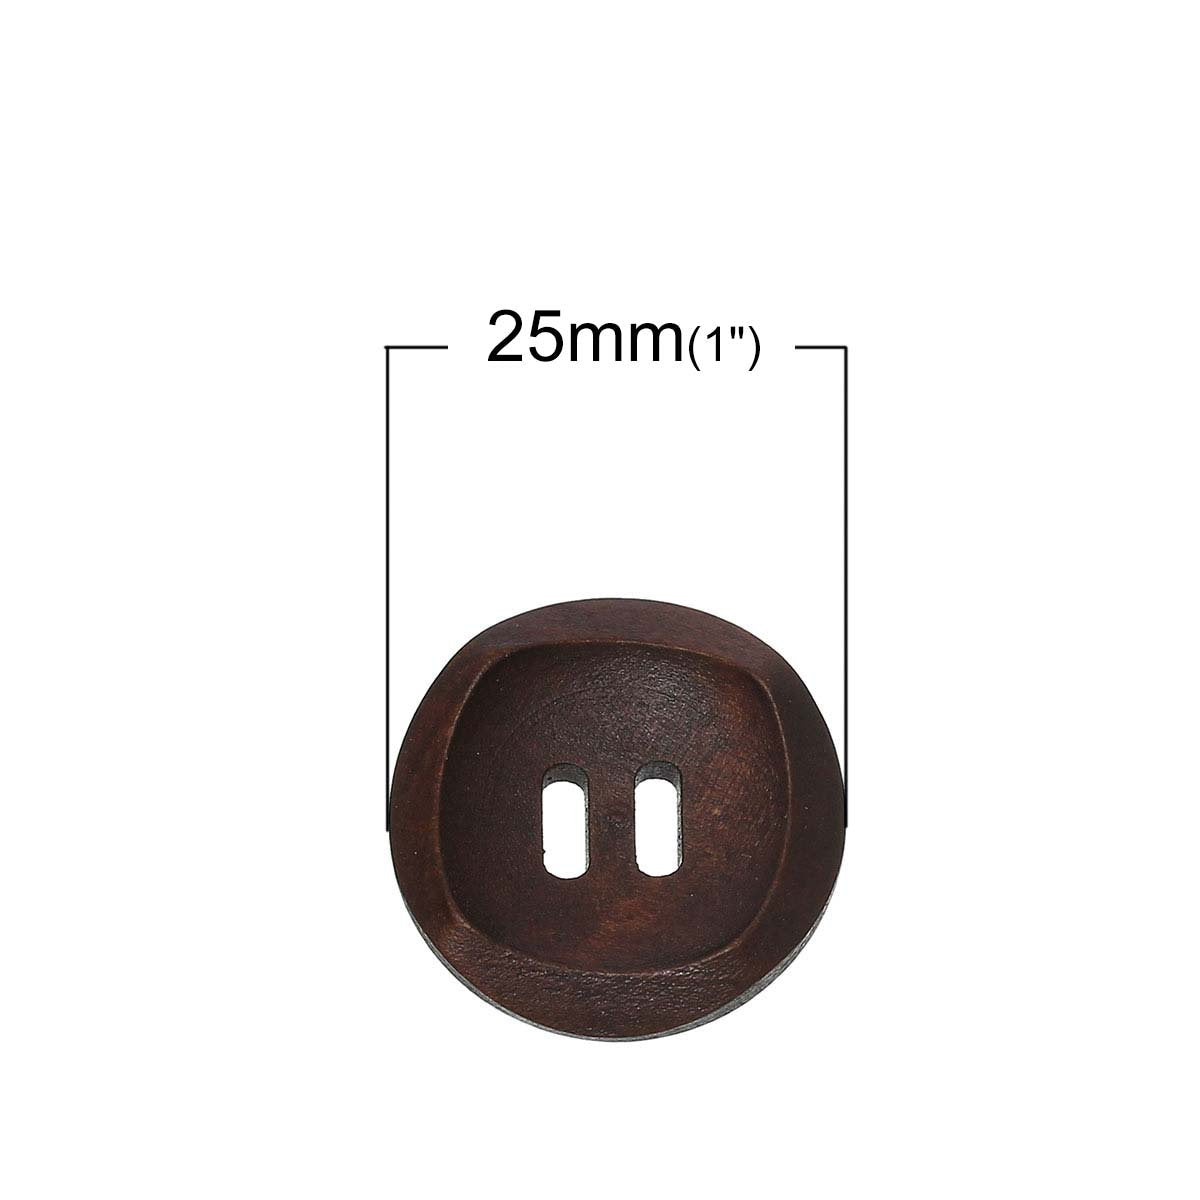 50 Pcs 1 inch Wooden Buttons, 25mm Premium Buttons for Sewing Craft  Clothing, Brown Color, Natural Chestnut Made, 4 Hole